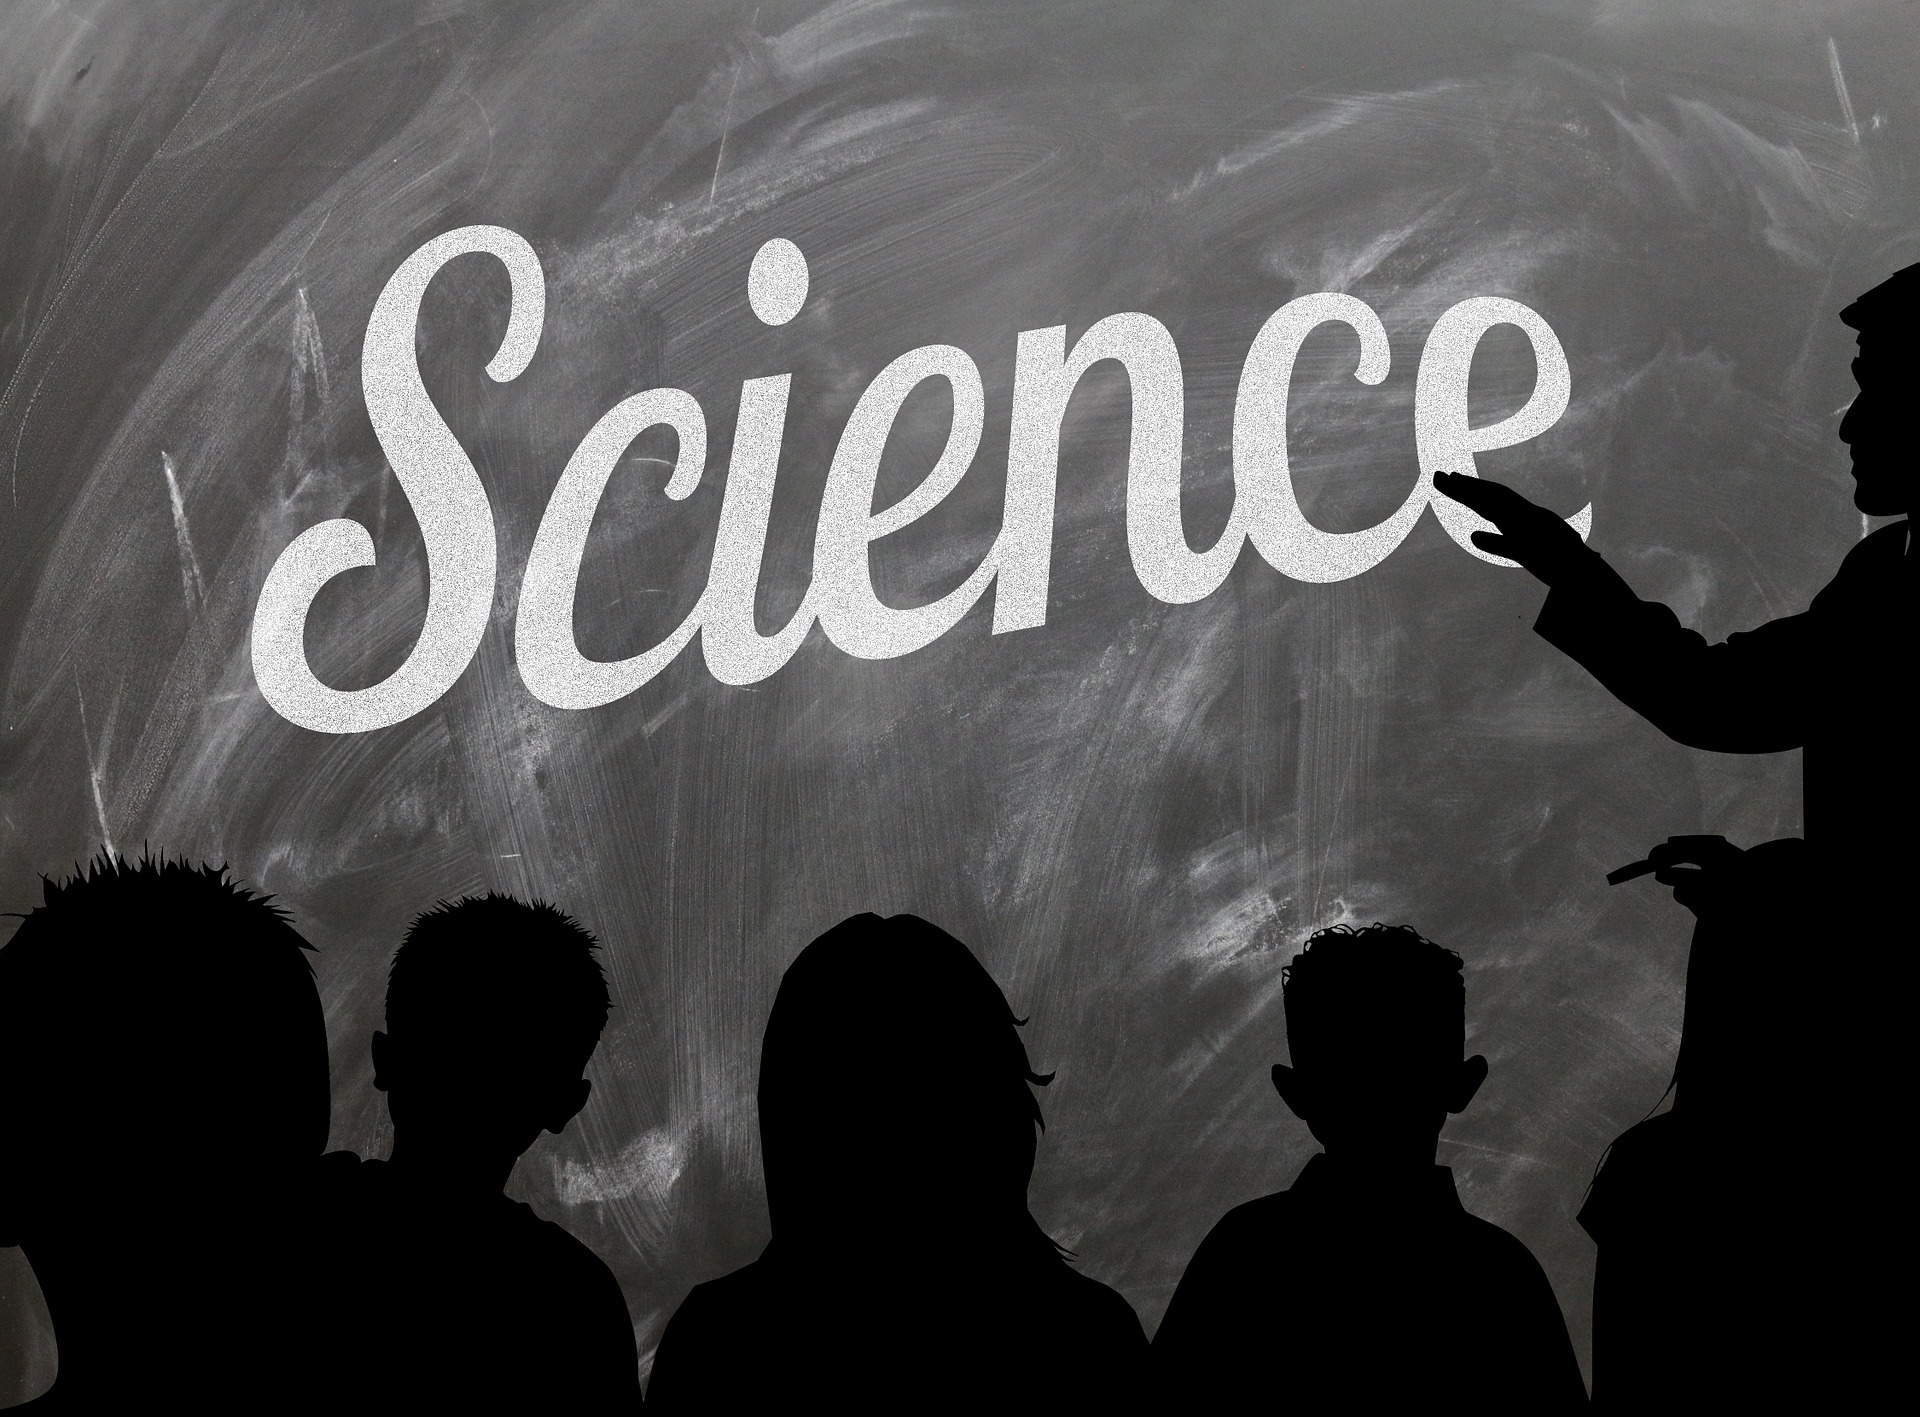 Silhouettes in front of chalkboard that says science